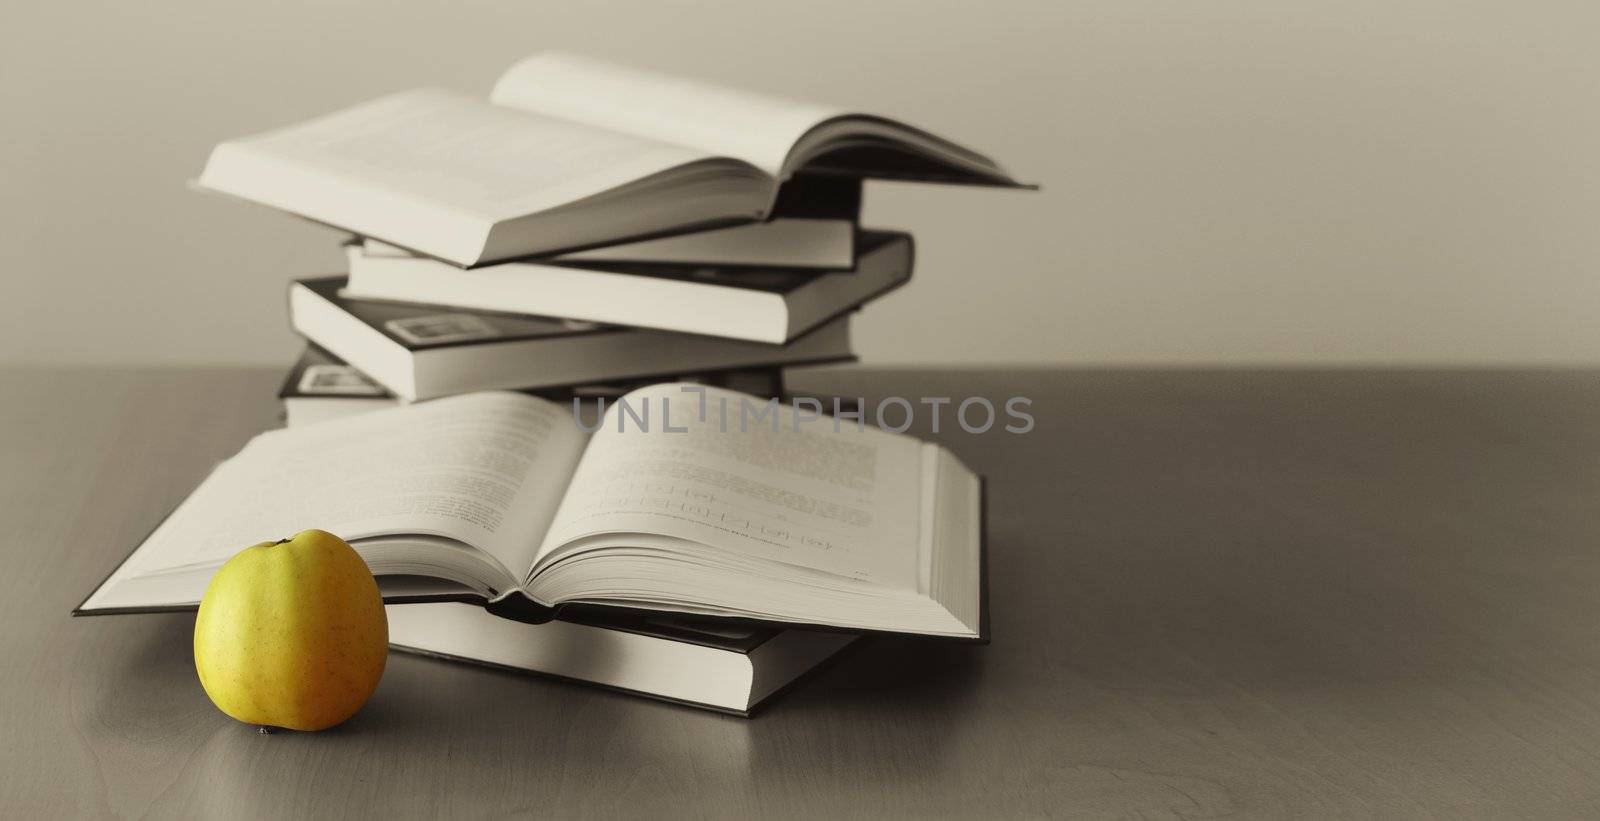 green apple and opened books on sepia background